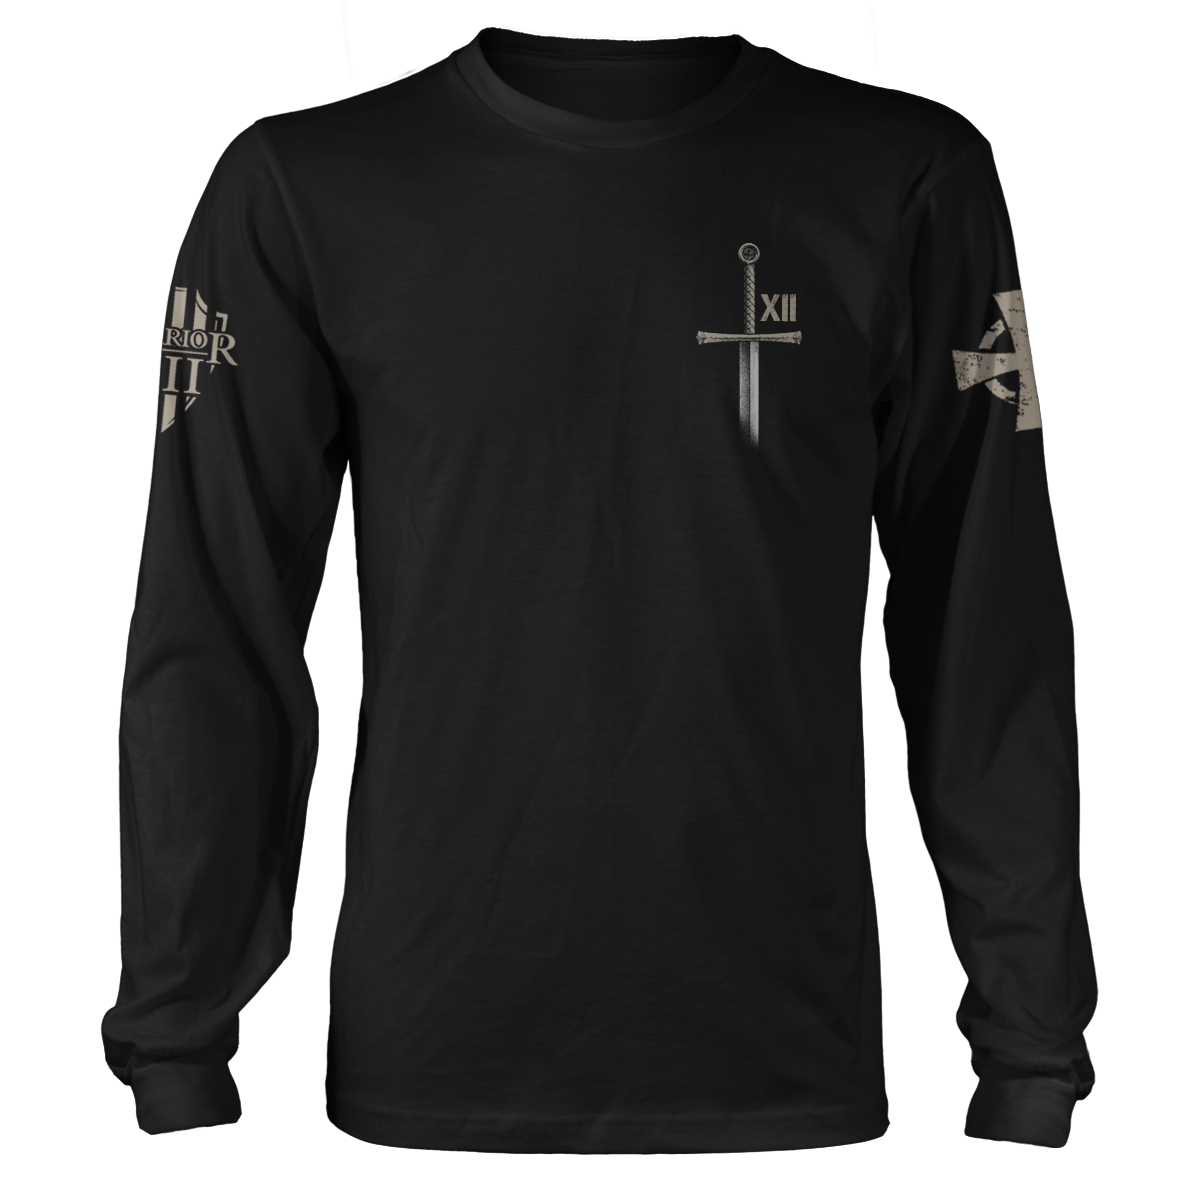 A black long sleeve shirt with a sword and roman numerals XII printed on the front.